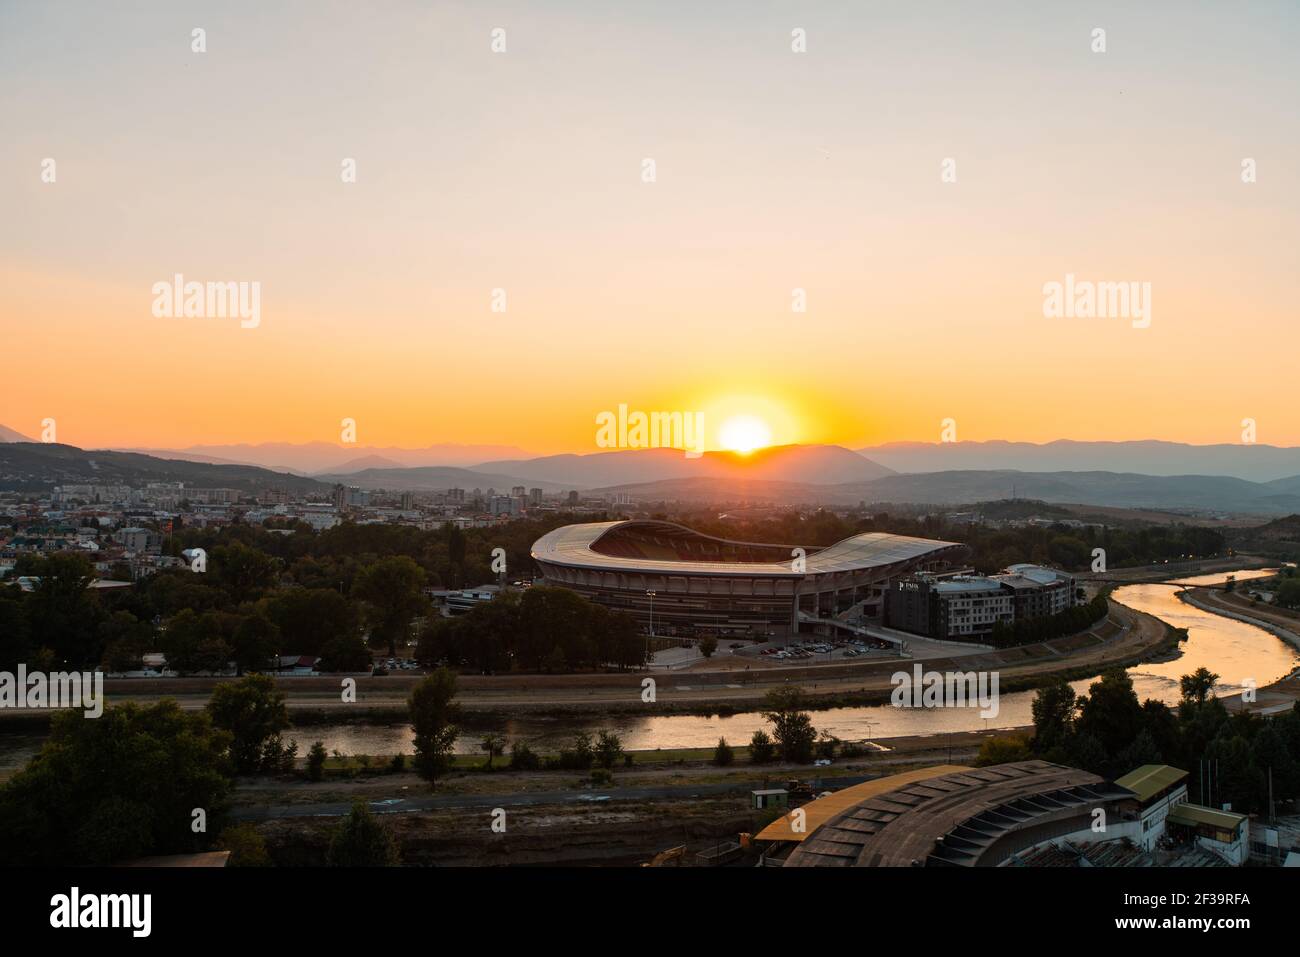 View of Tose Proeski Arena by Vardar river during sunset Stock Photo